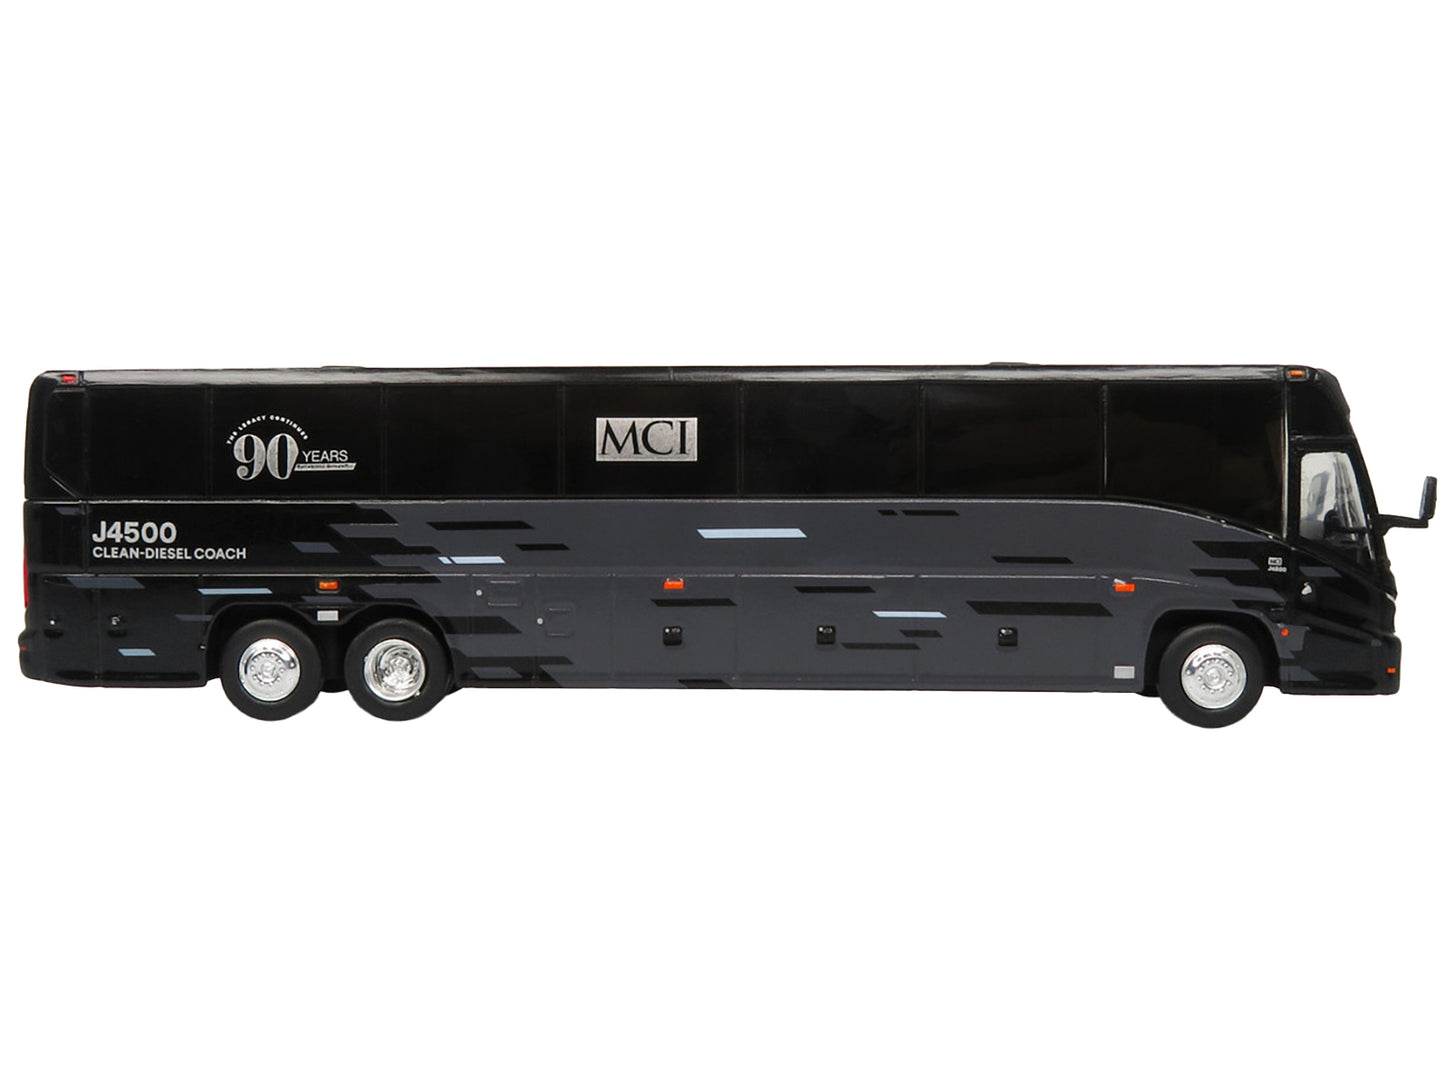 MCI J4500 Coach Bus "MCI 90th Anniversary" Black and Gray "The Bus & Motorcoach Collection" Limited Edition to 504 pieces Worldwide 1/87 (HO) Diecast Model by Iconic Replicas